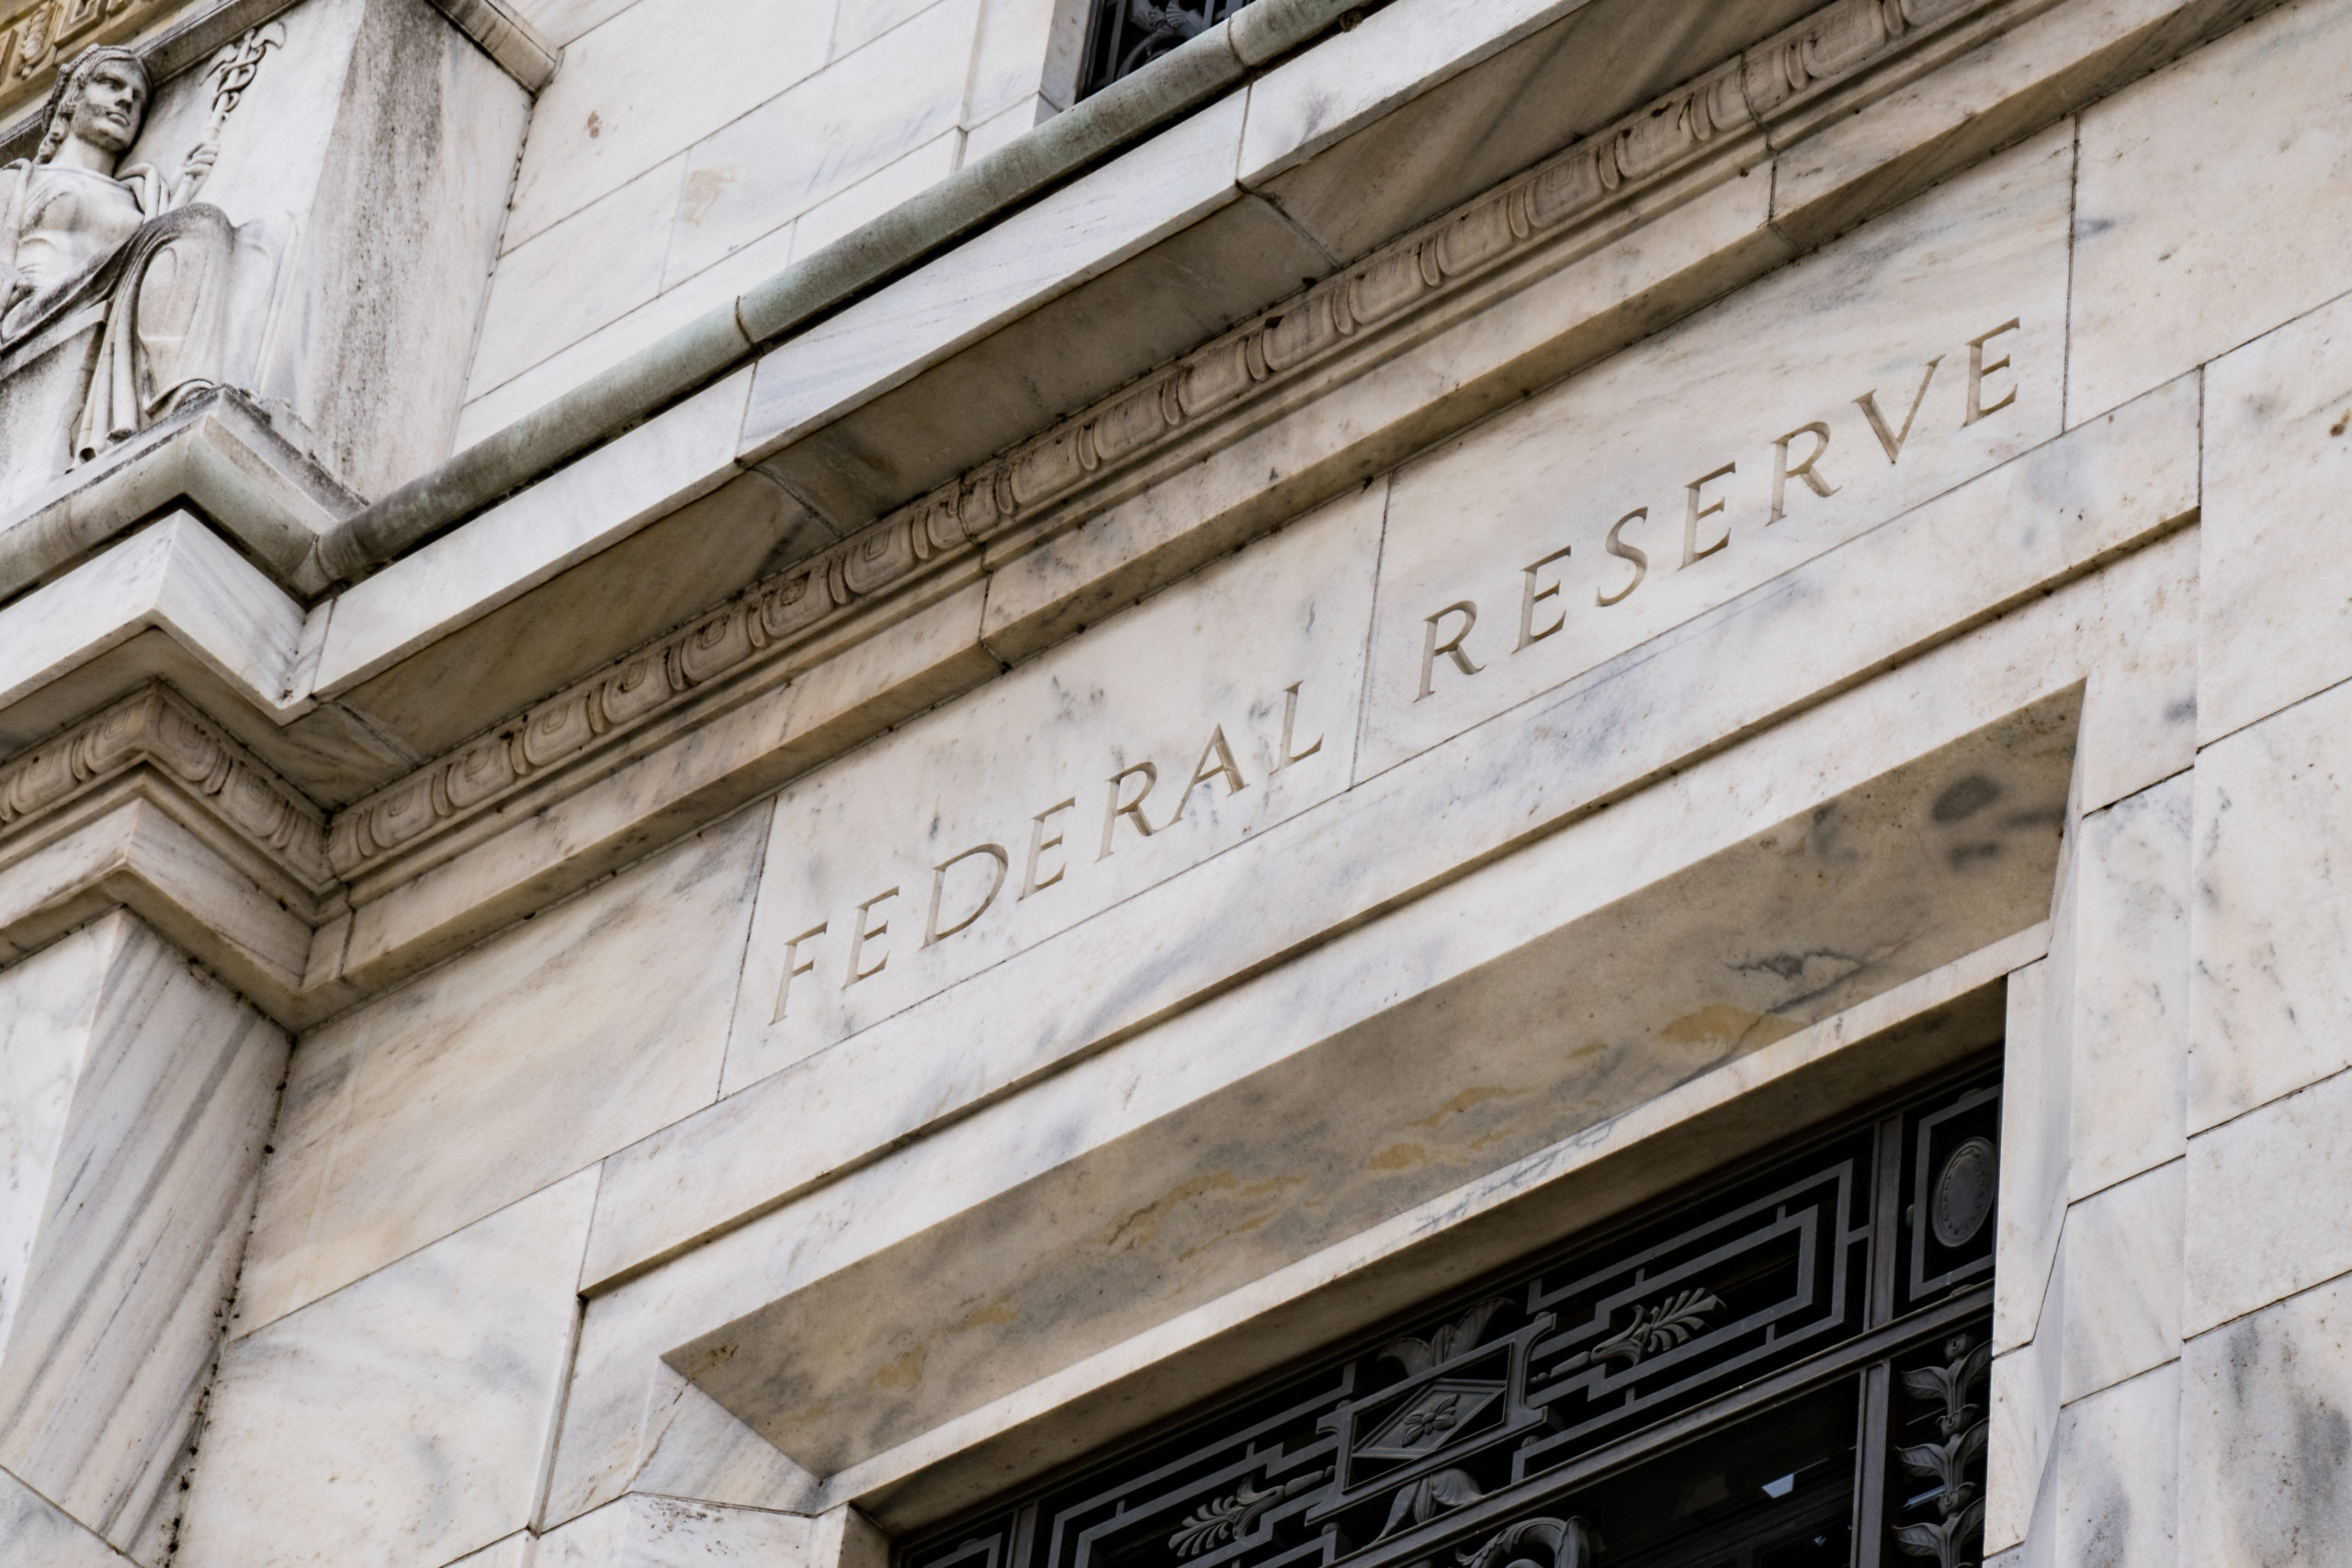 Federal Reserve says stablecoins are ‘prone to runs’ in new financial stability report